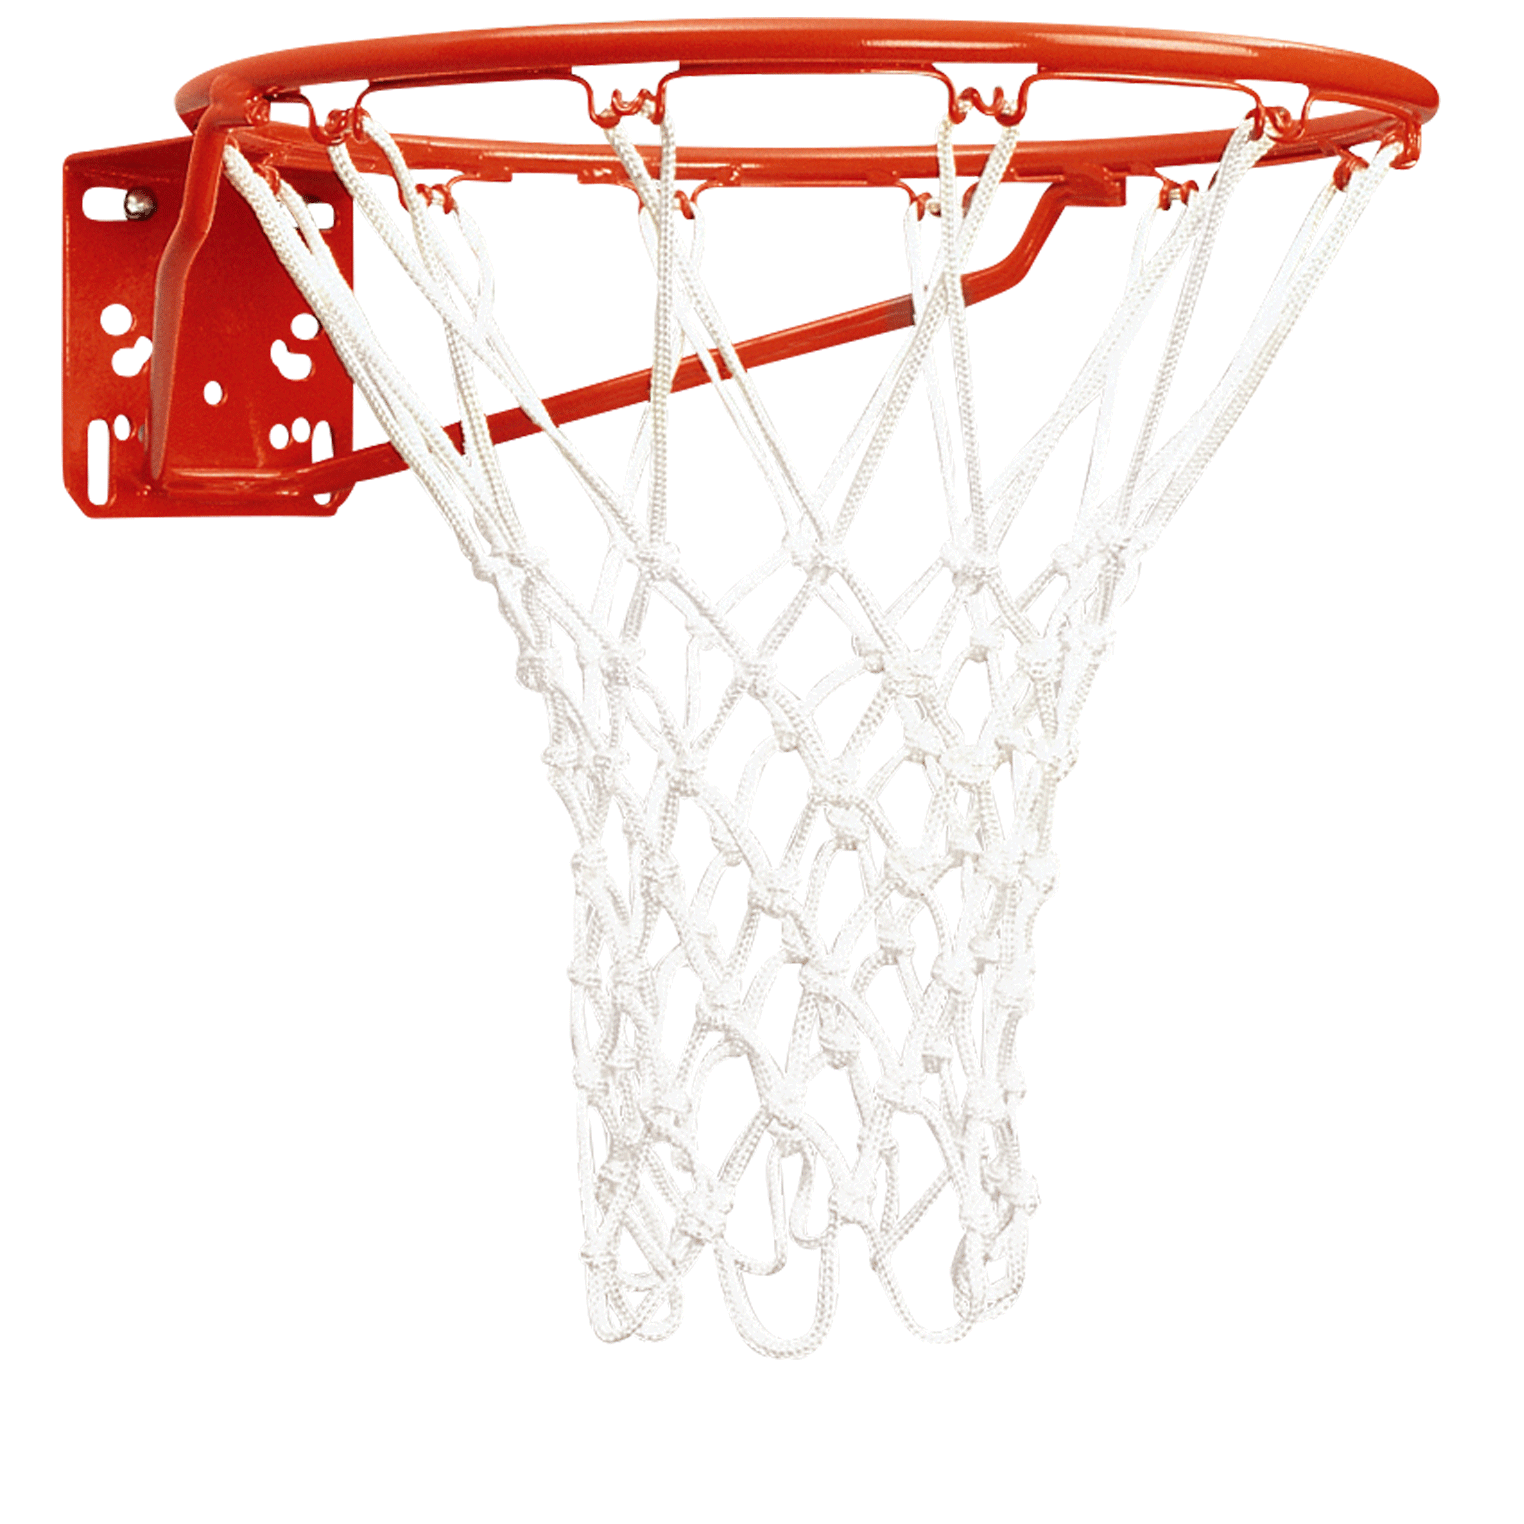 Effortlessly Height Adjustable from 7.5 to 10 Feet Fit Indoor and Outdoor Wall katop 60 72 Wall Moundted Basketball Goal Hoop with a High-Performance Tempered Glass Backboard